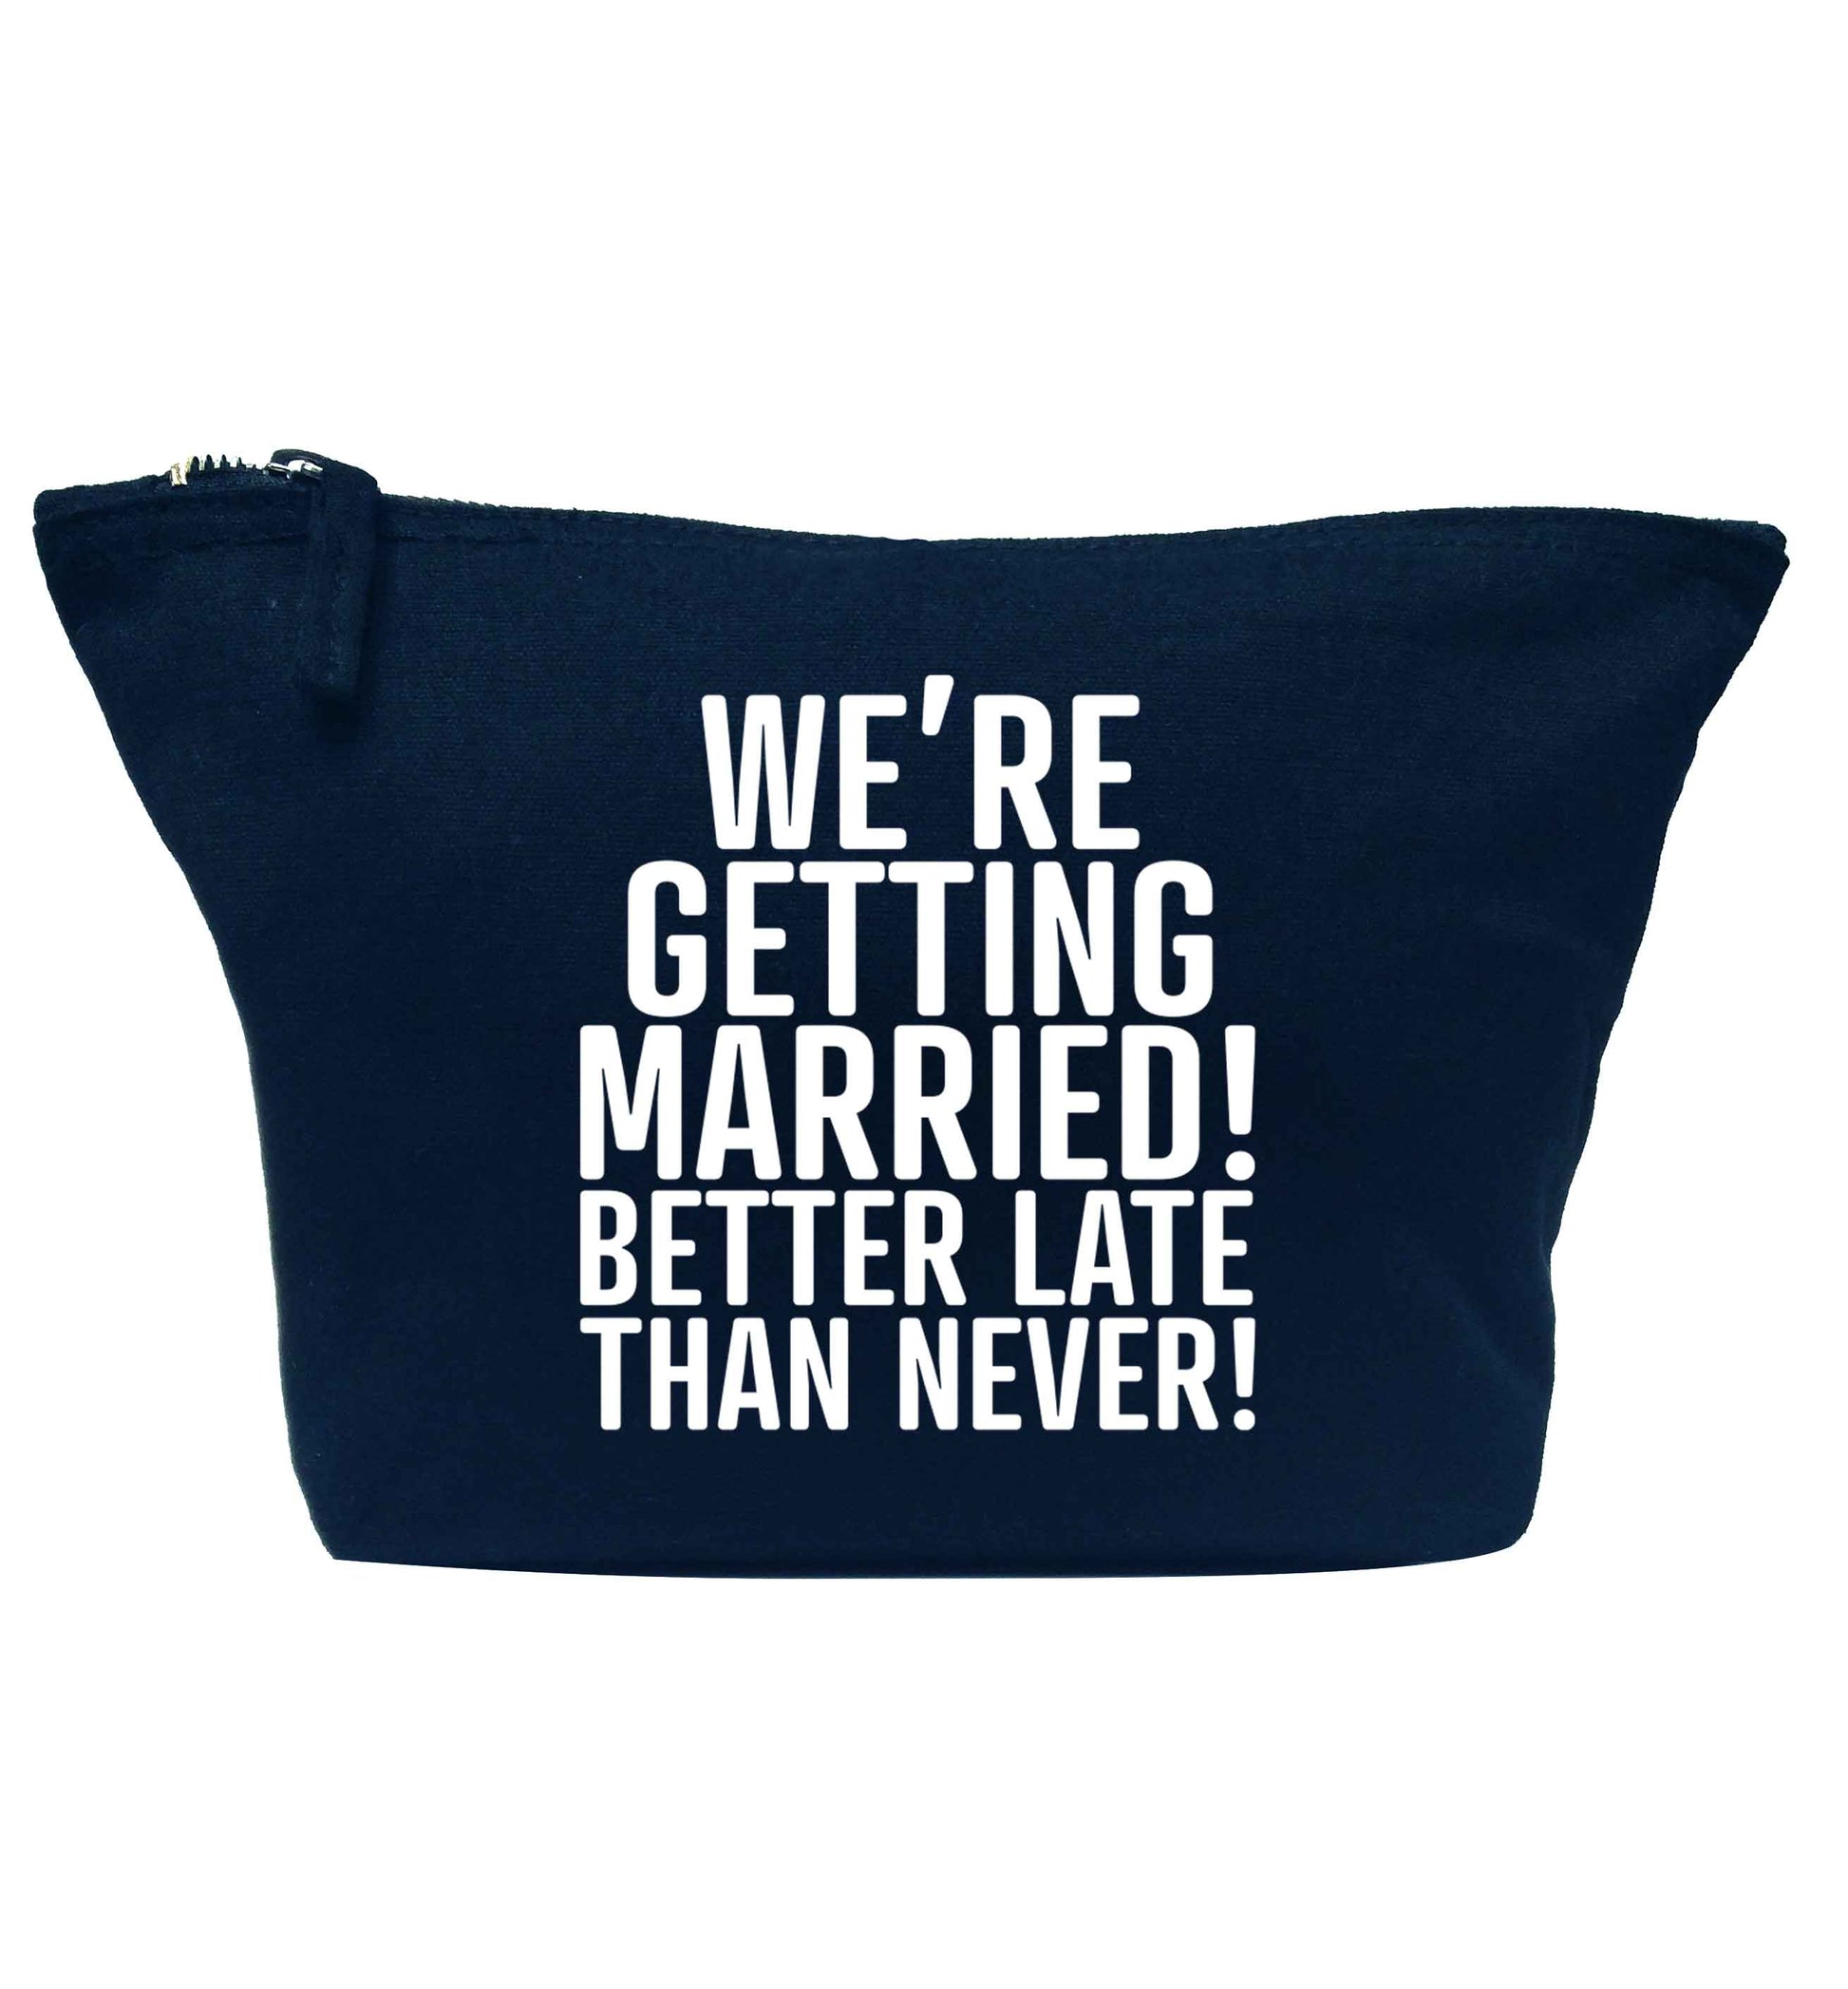 Always the bridesmaid but never the bride? Until now! navy makeup bag